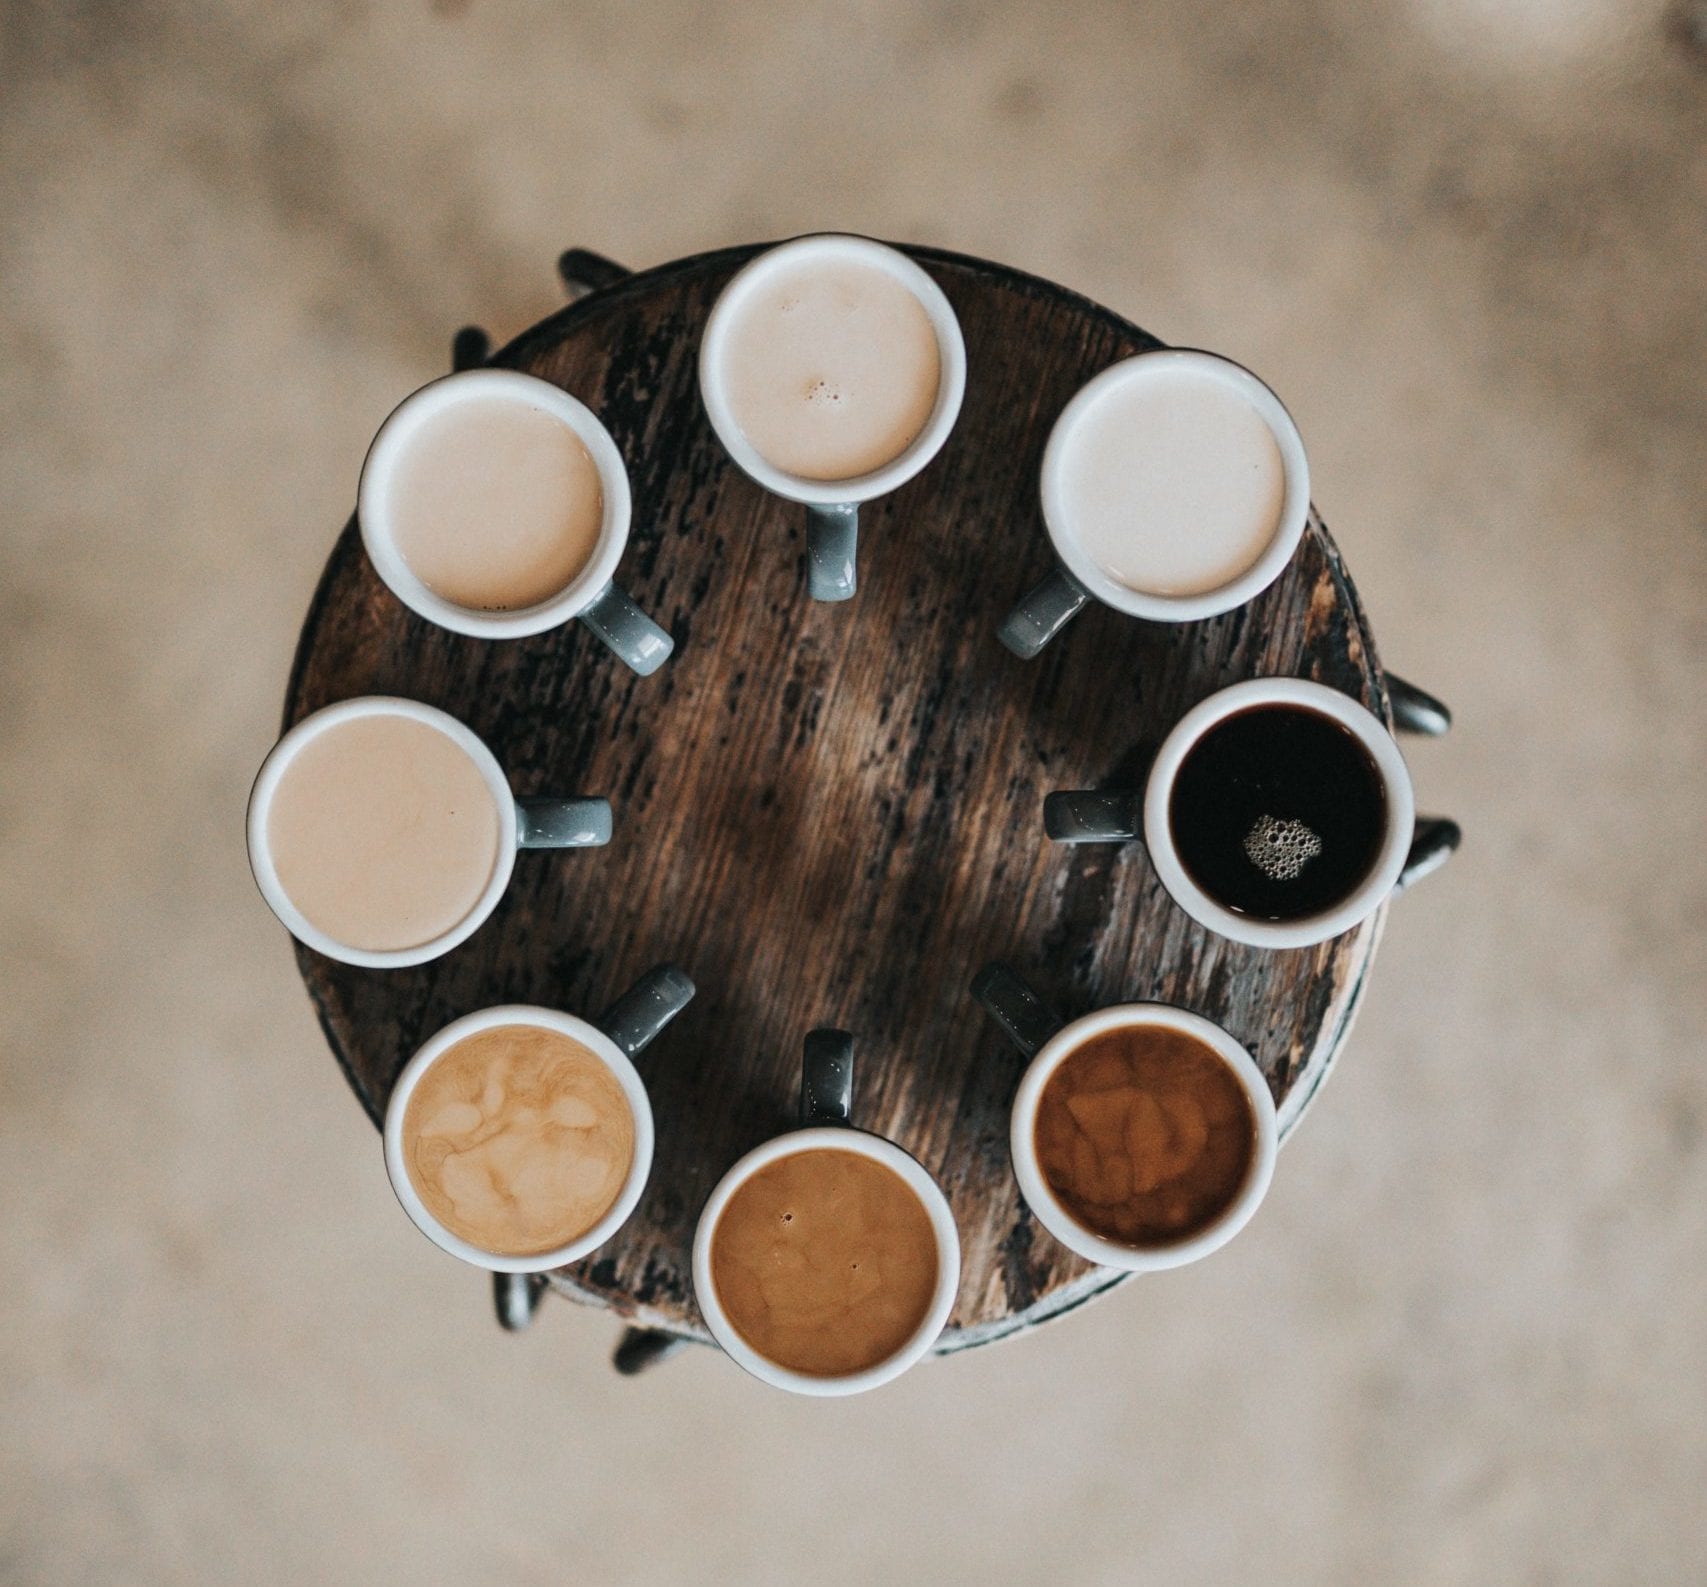 Photo: Different shades of coffee in mugs by Nathan Dumlao on Unsplash.